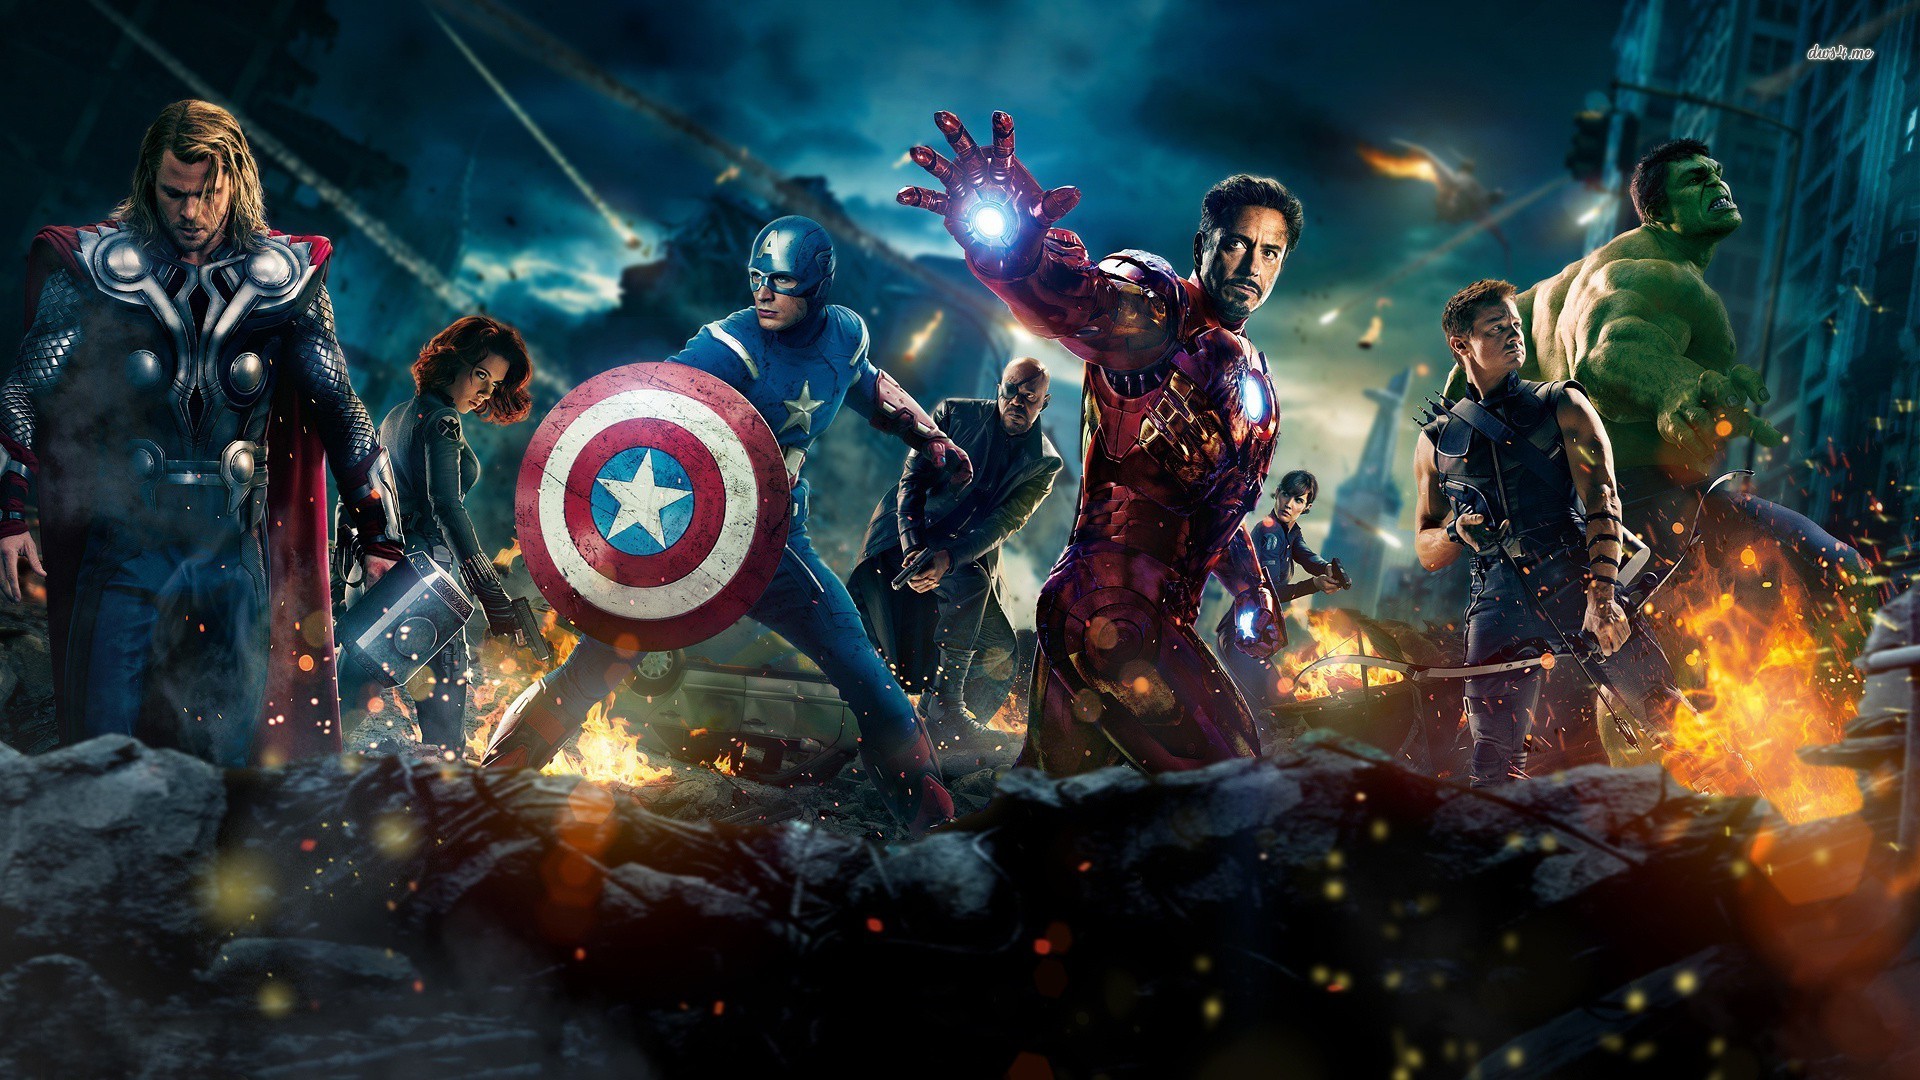 The Avengers wallpaper 1280x800 The Avengers wallpaper 1366x768 The